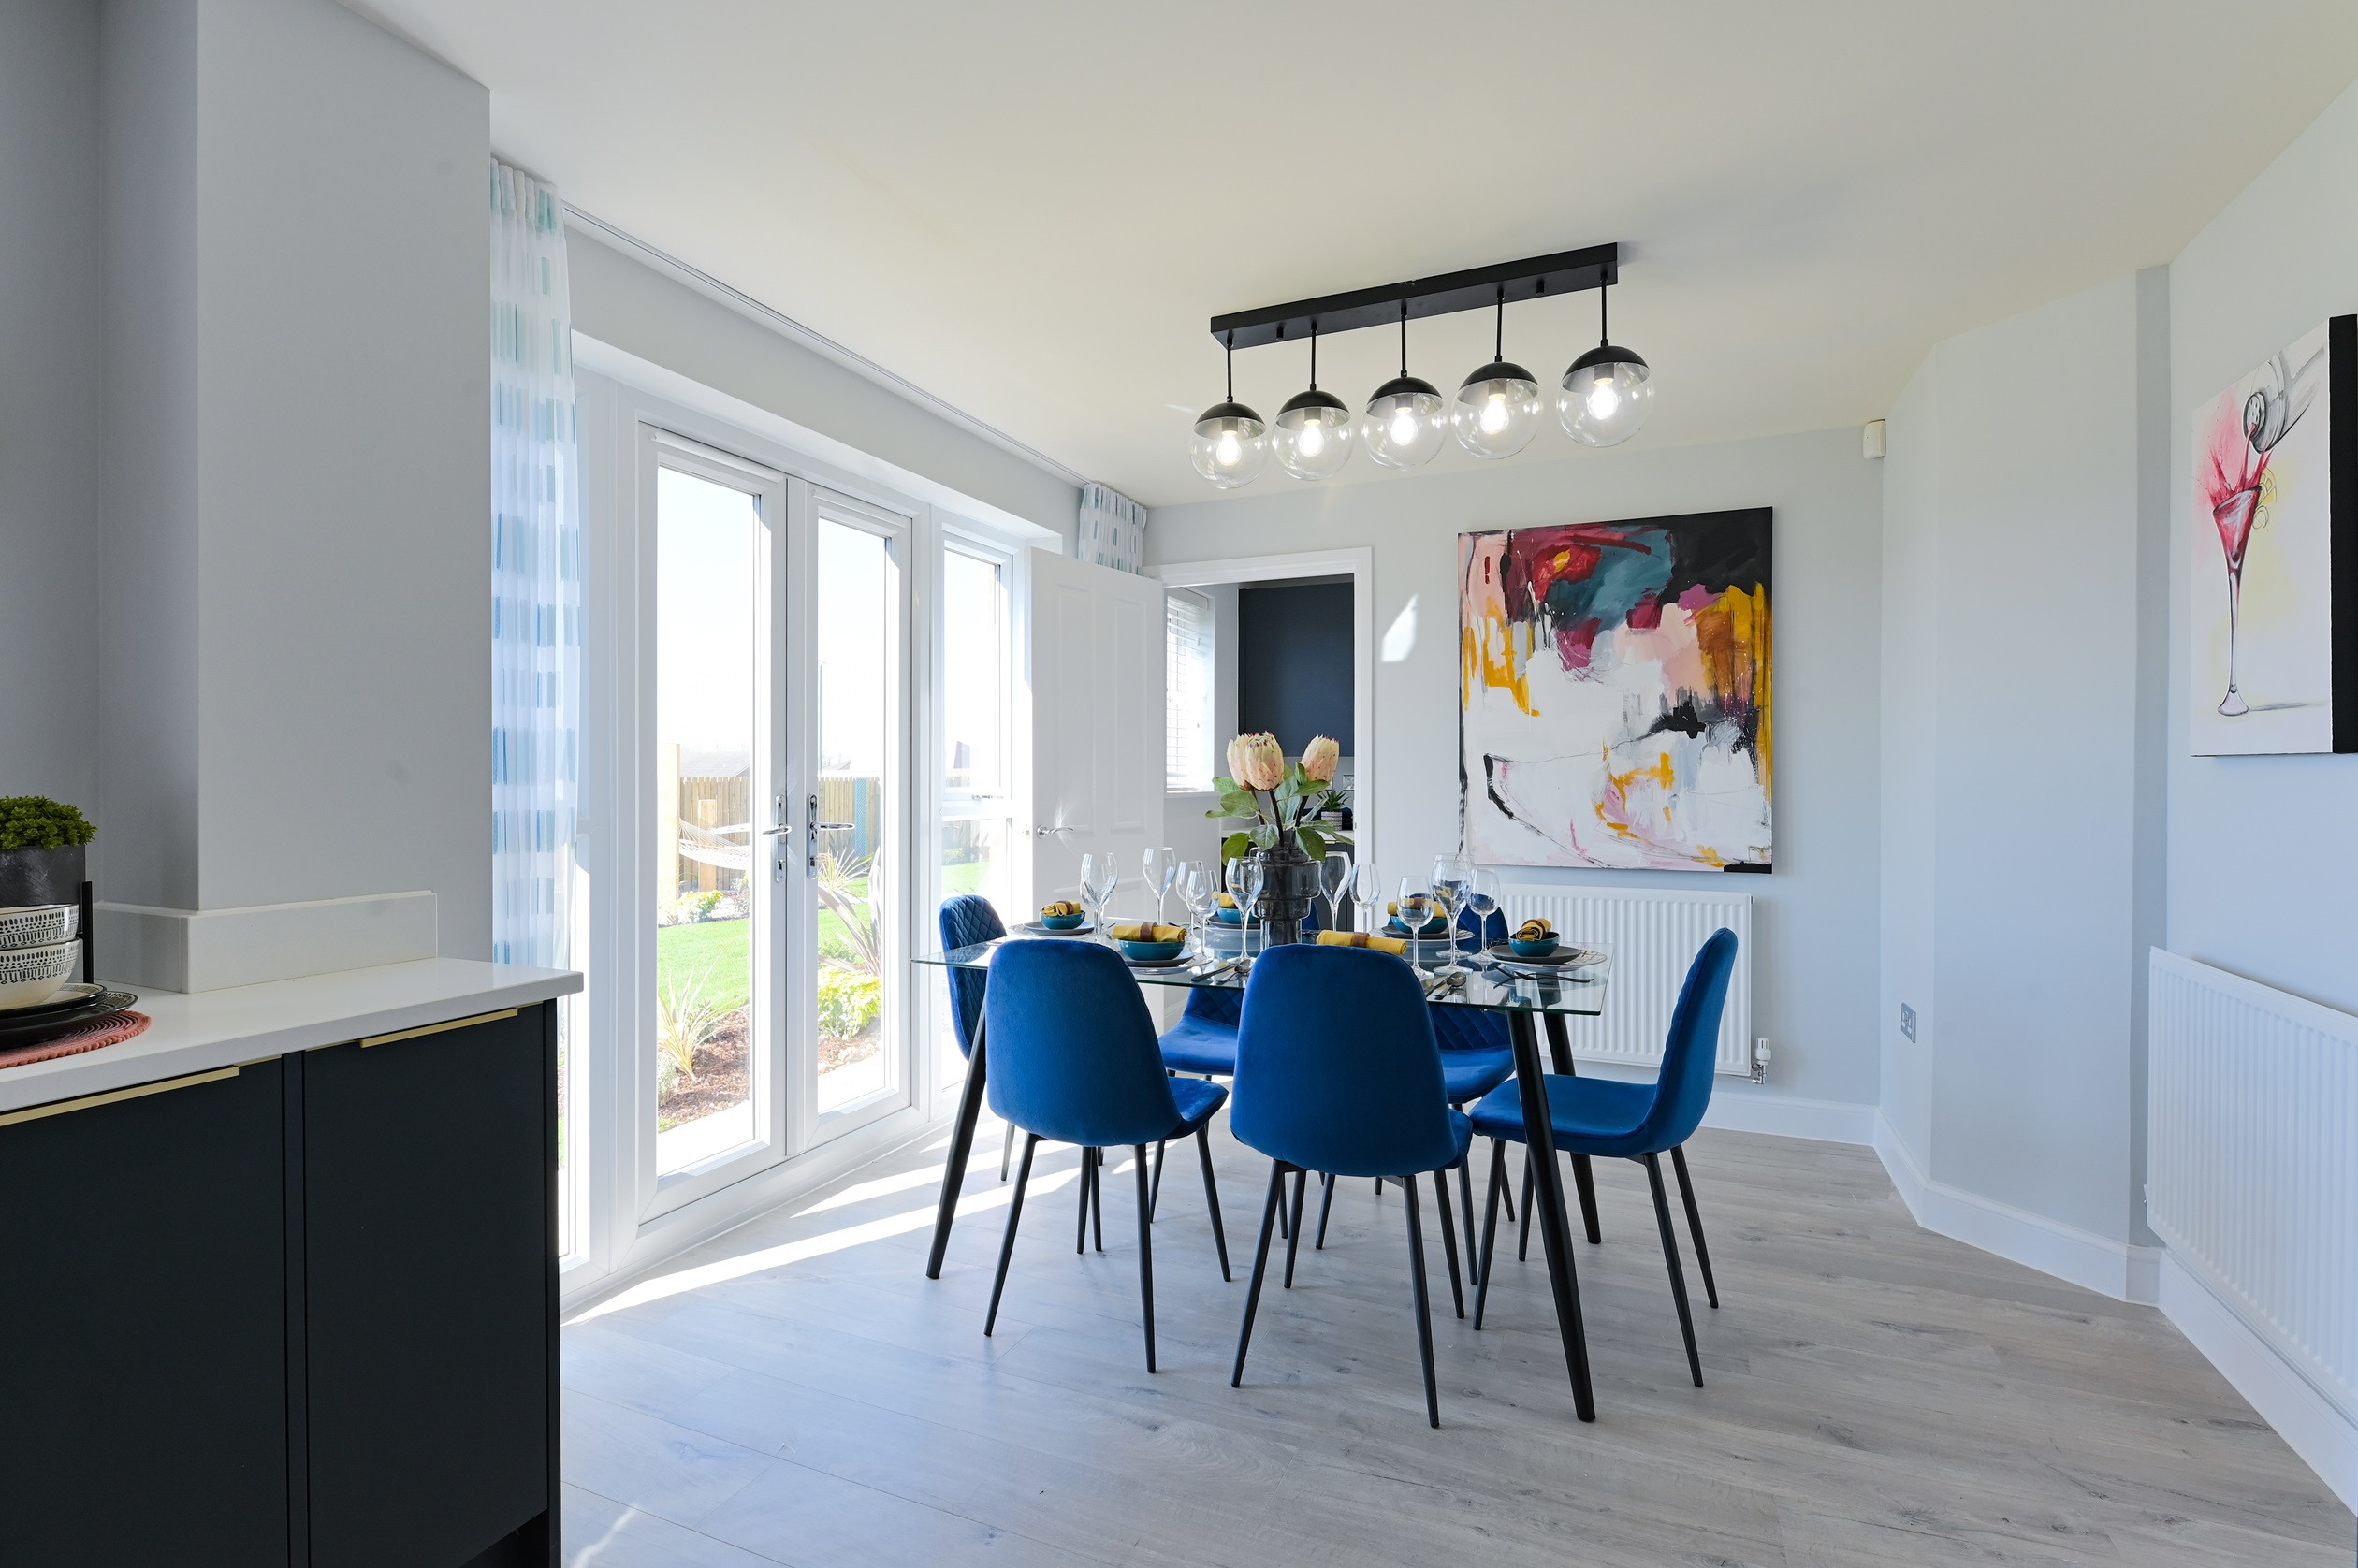 Property 3 of 10. Barratt Windermere 4 Bed Show Home In New Waltham, Wigmore Park Dining Area